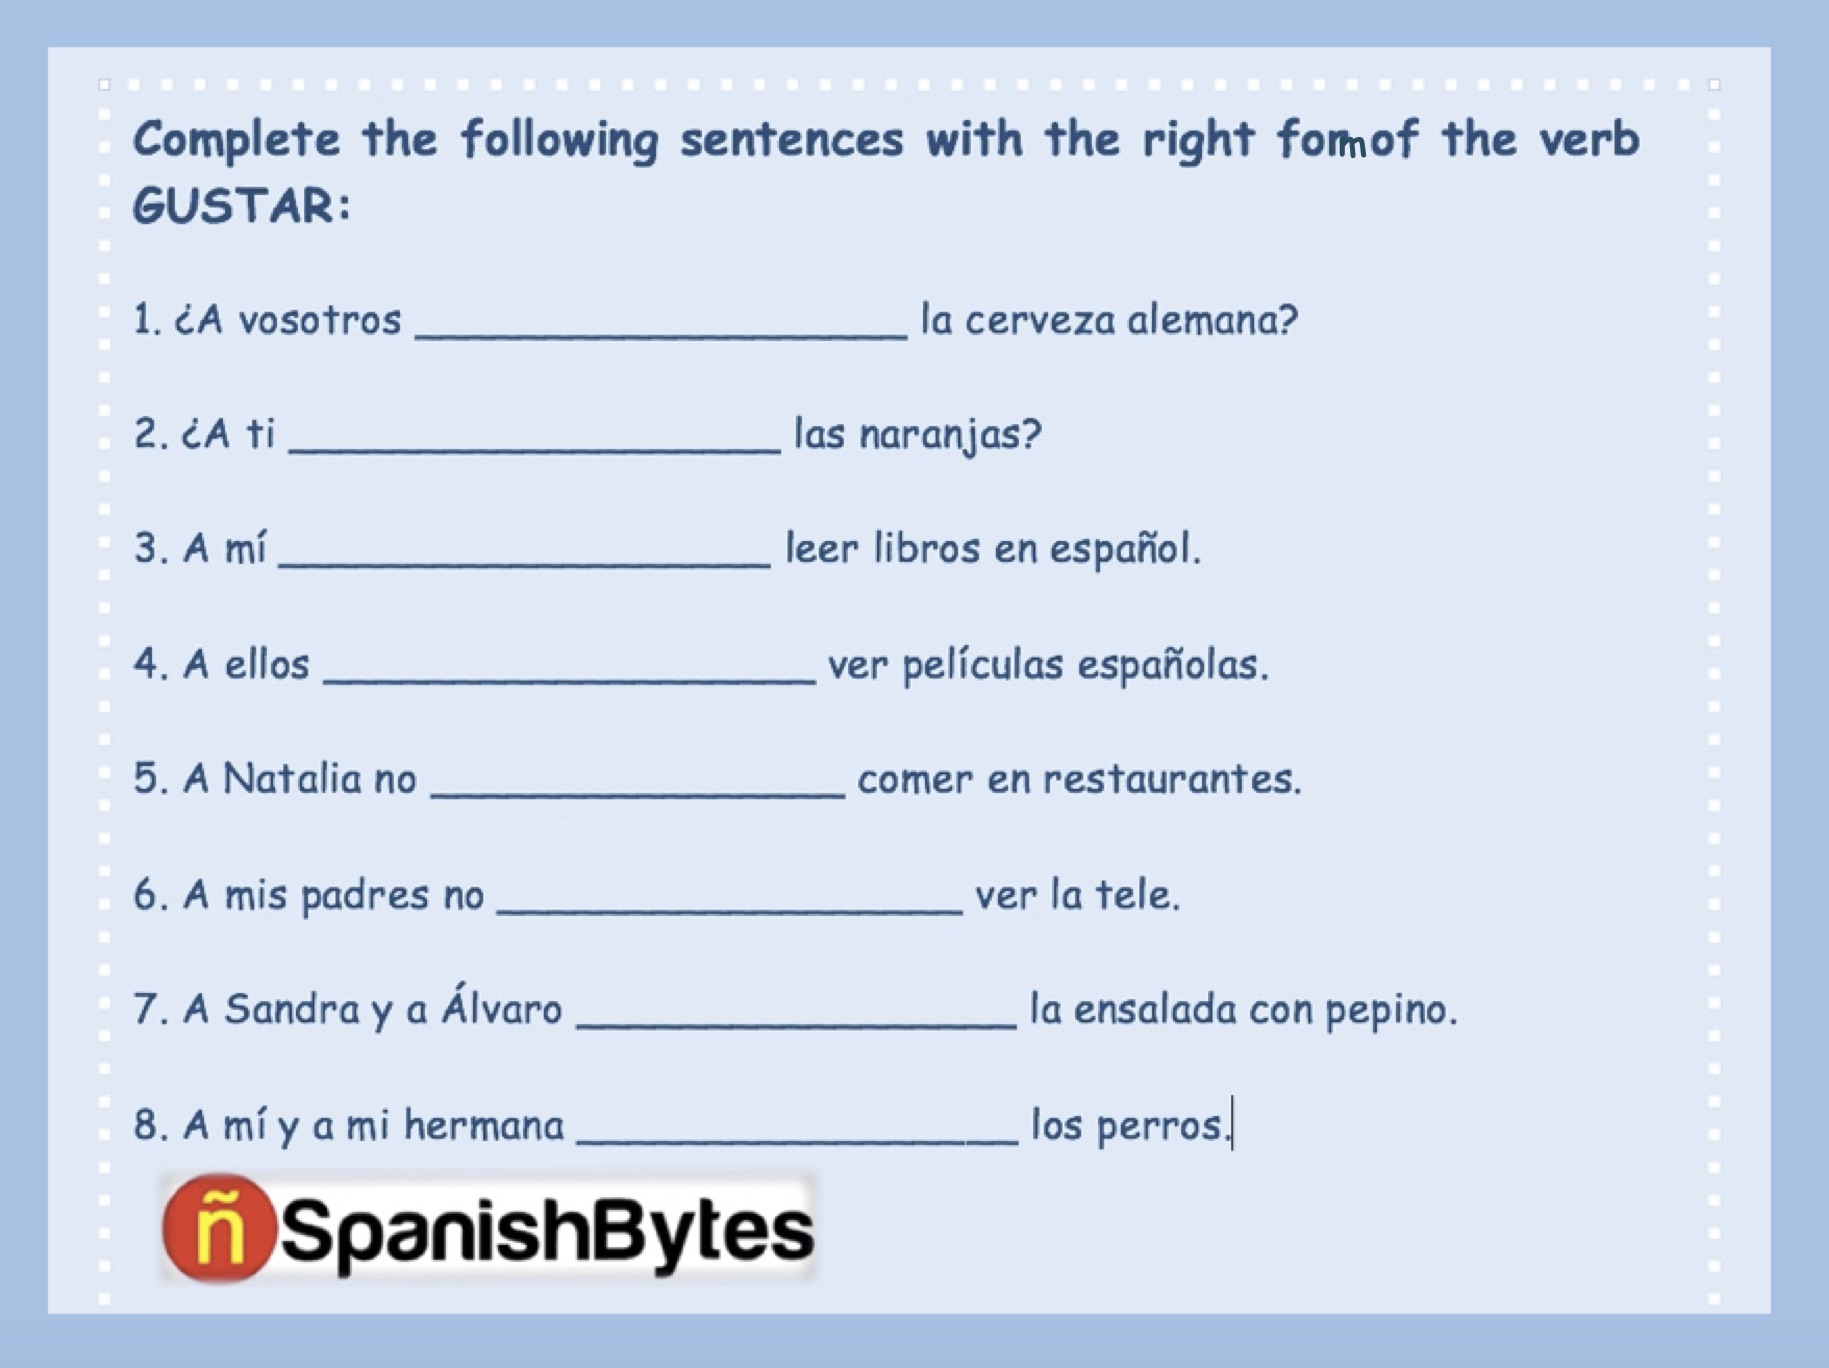 special-verbs-using-the-right-form-spanish-bytes